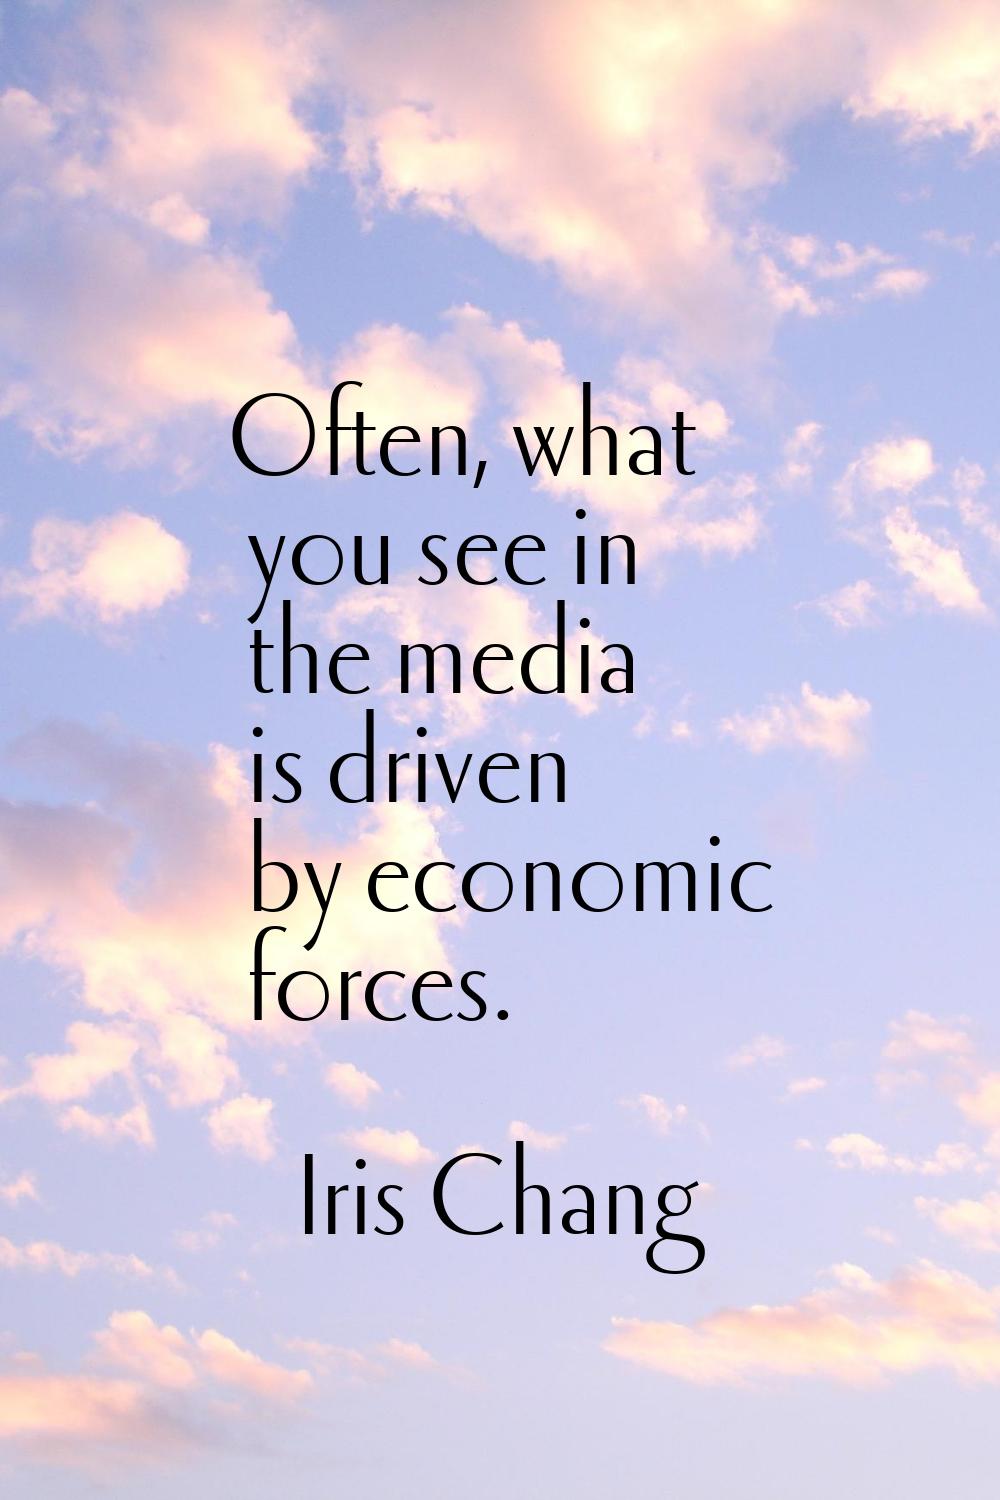 Often, what you see in the media is driven by economic forces.